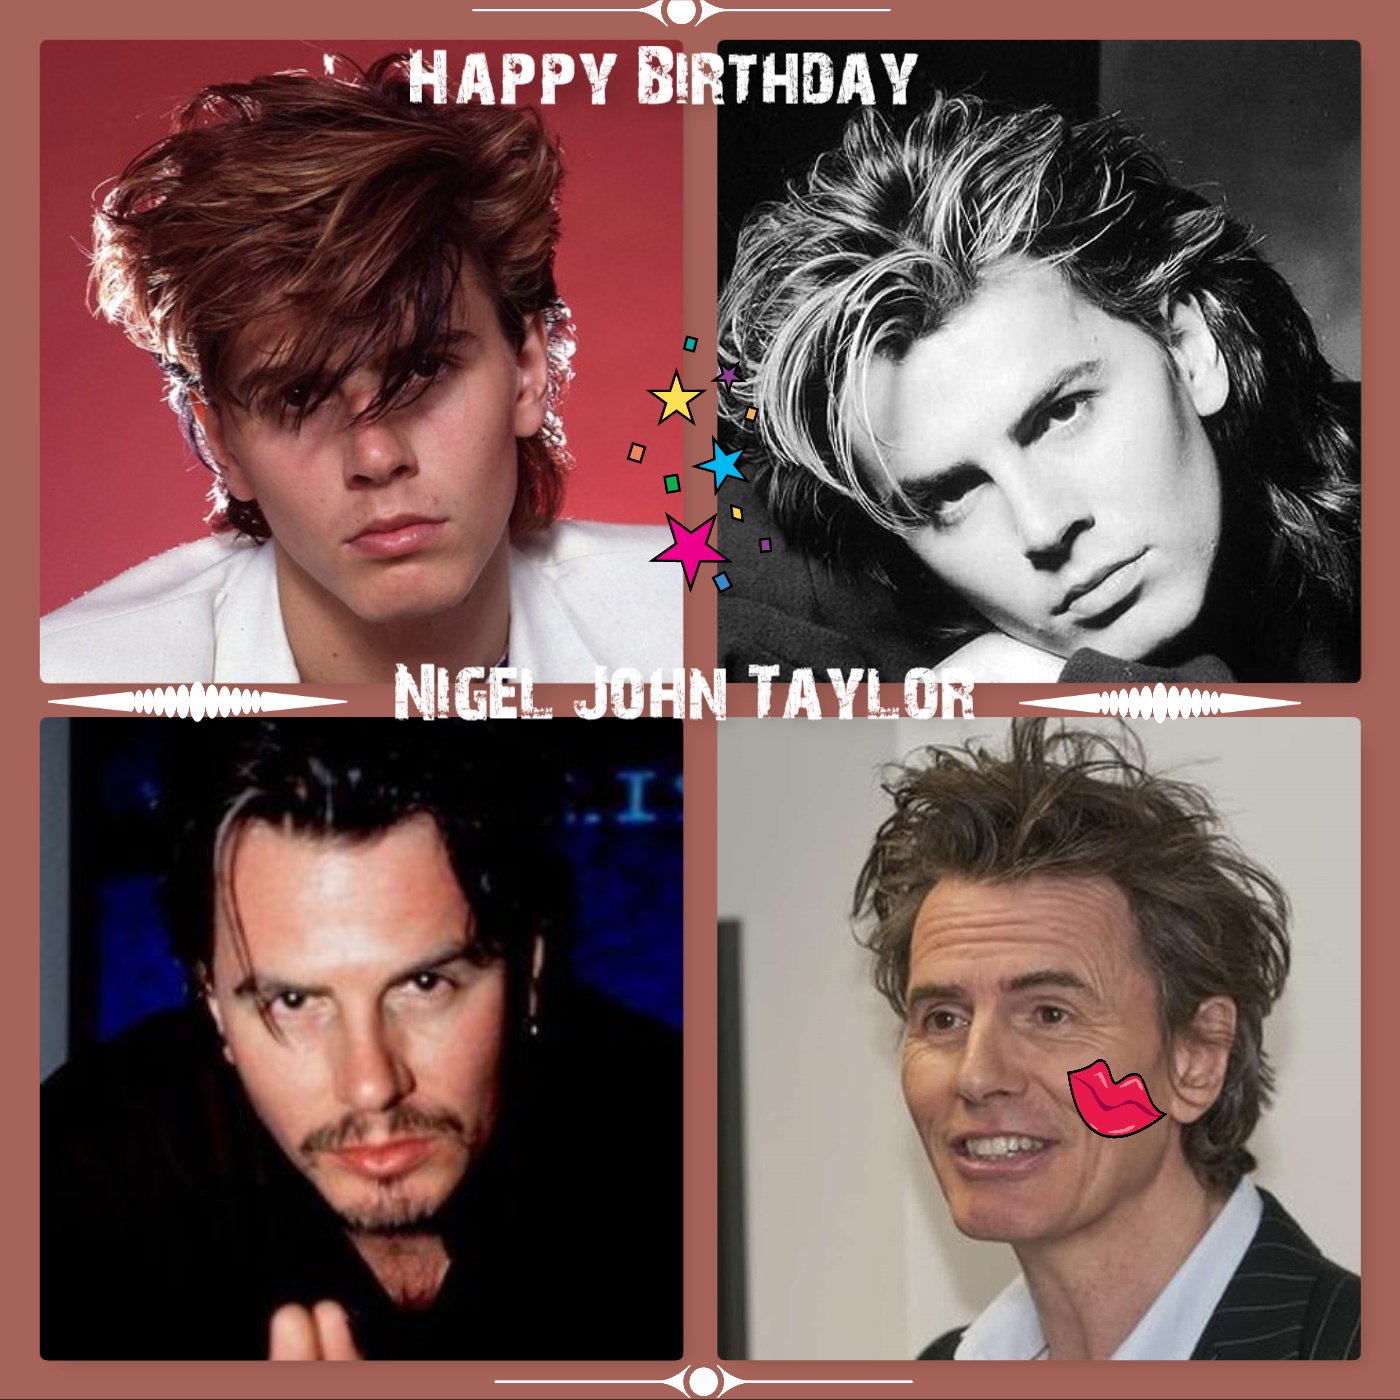  Happy belated Birthday John Taylor Hope you had a great day with family and friends. 